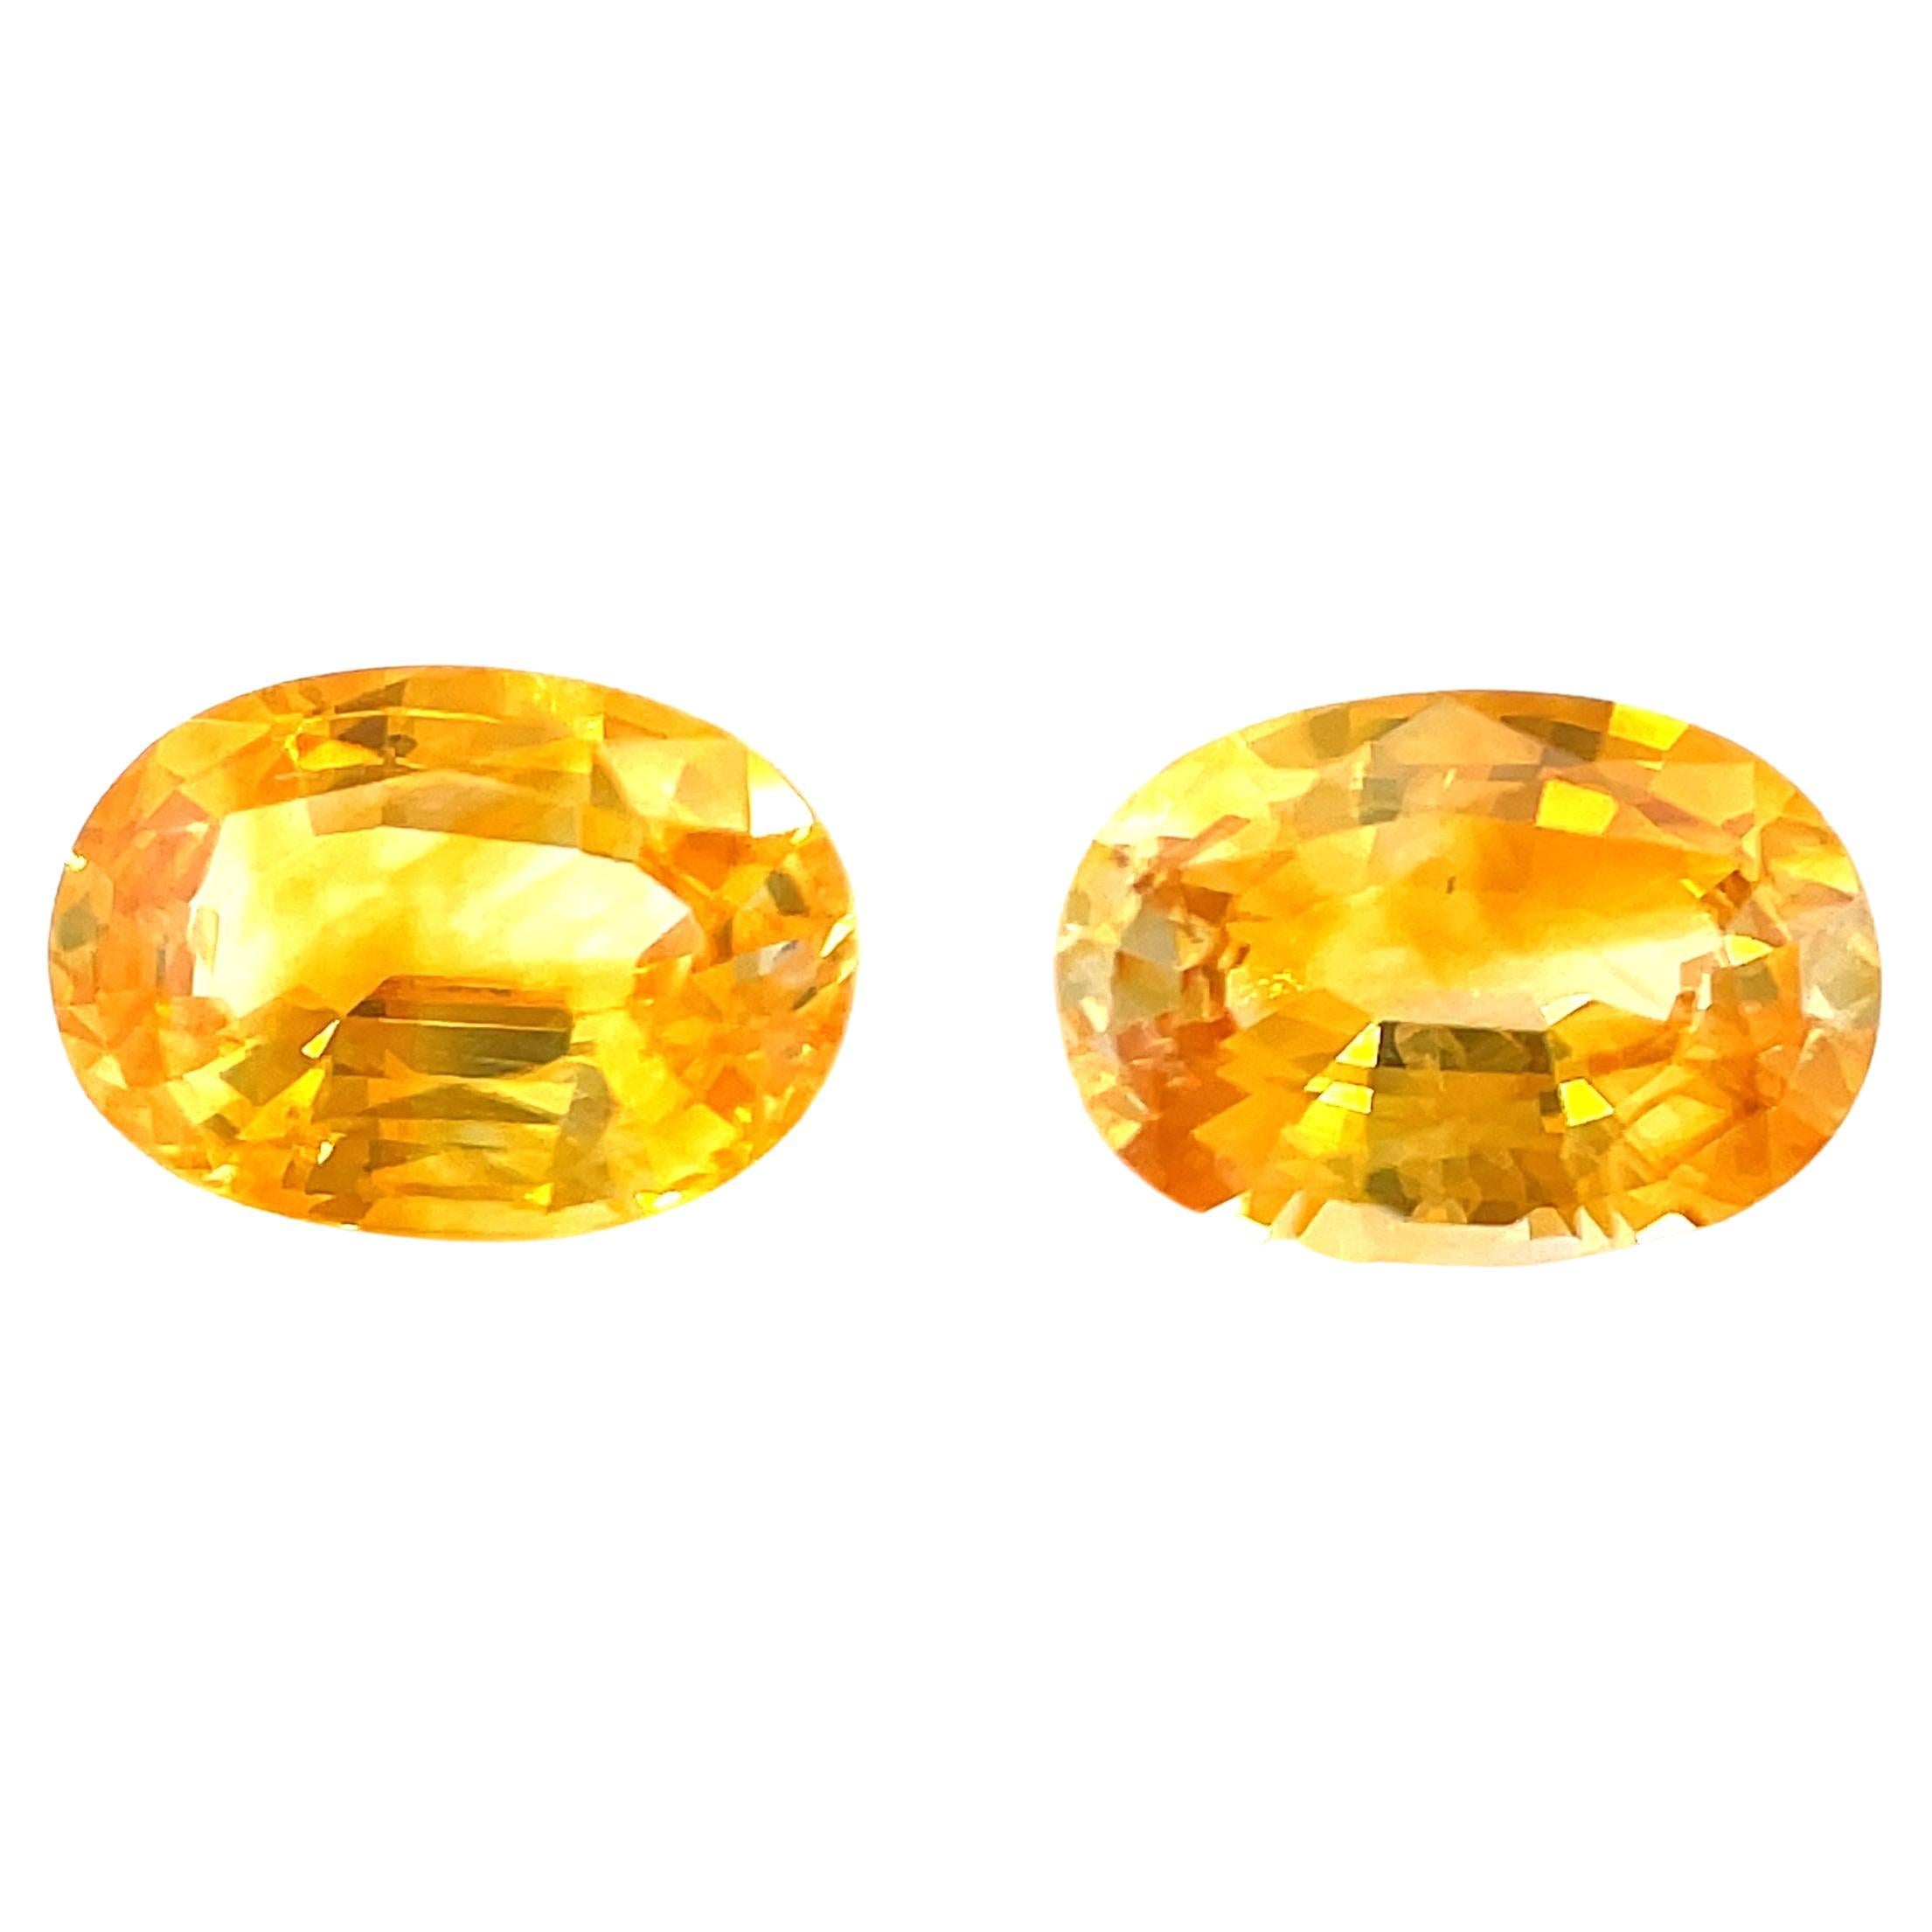 1.92 Carat Total Oval Yellow Sapphire Pair for Earrings, Loose Gemstones